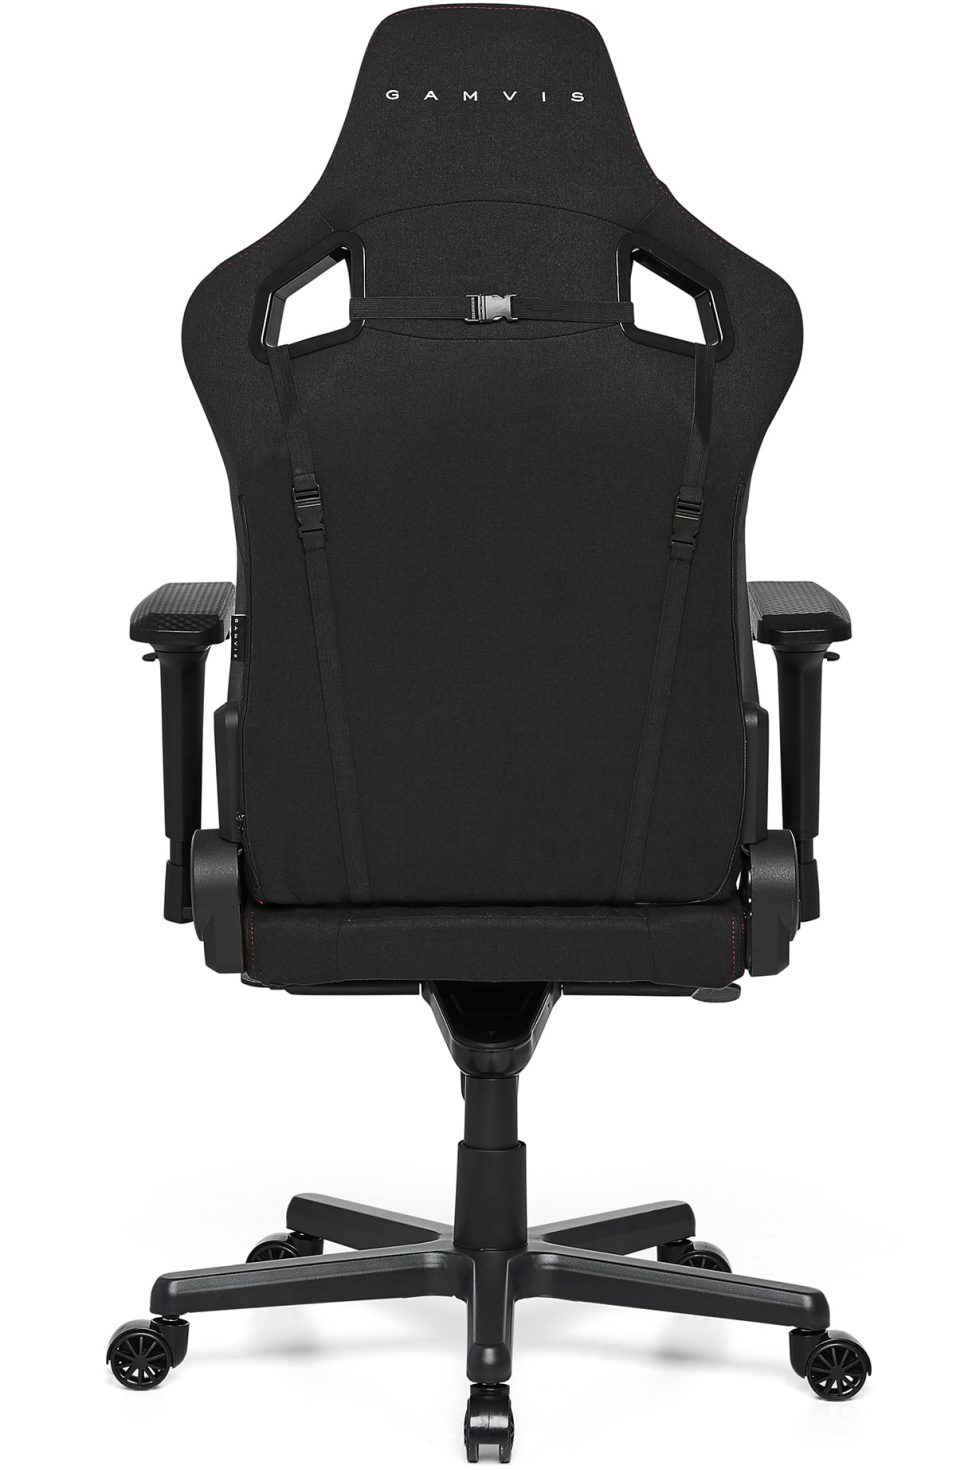 Gamvis Elite fabric gaming chair black red